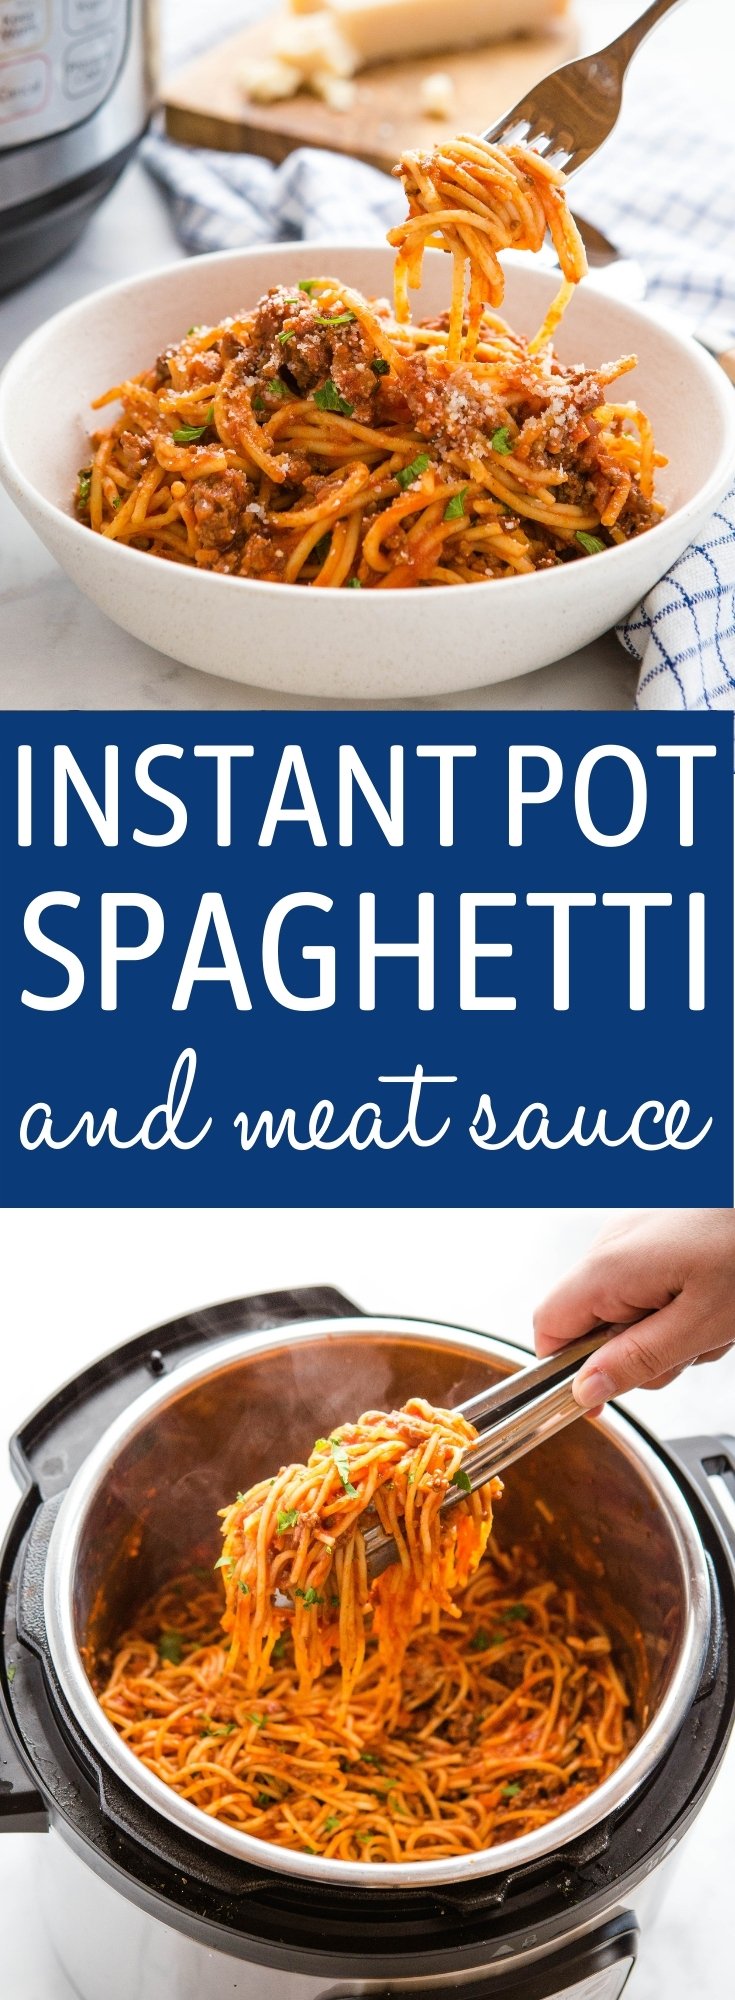 This Instant Pot Spaghetti and Meat Sauce is the perfect easy family meal ready in 40 minutes! Classic comfort food made fast and easy! Recipe from thebusybaker.ca! #spaghetti #instantpot #instantpotdinner #spaghettiandmeatsauce #italian #dinner #supper #familymeal #mealprep #mealplanning #mealidea #kidfriendly via @busybakerblog